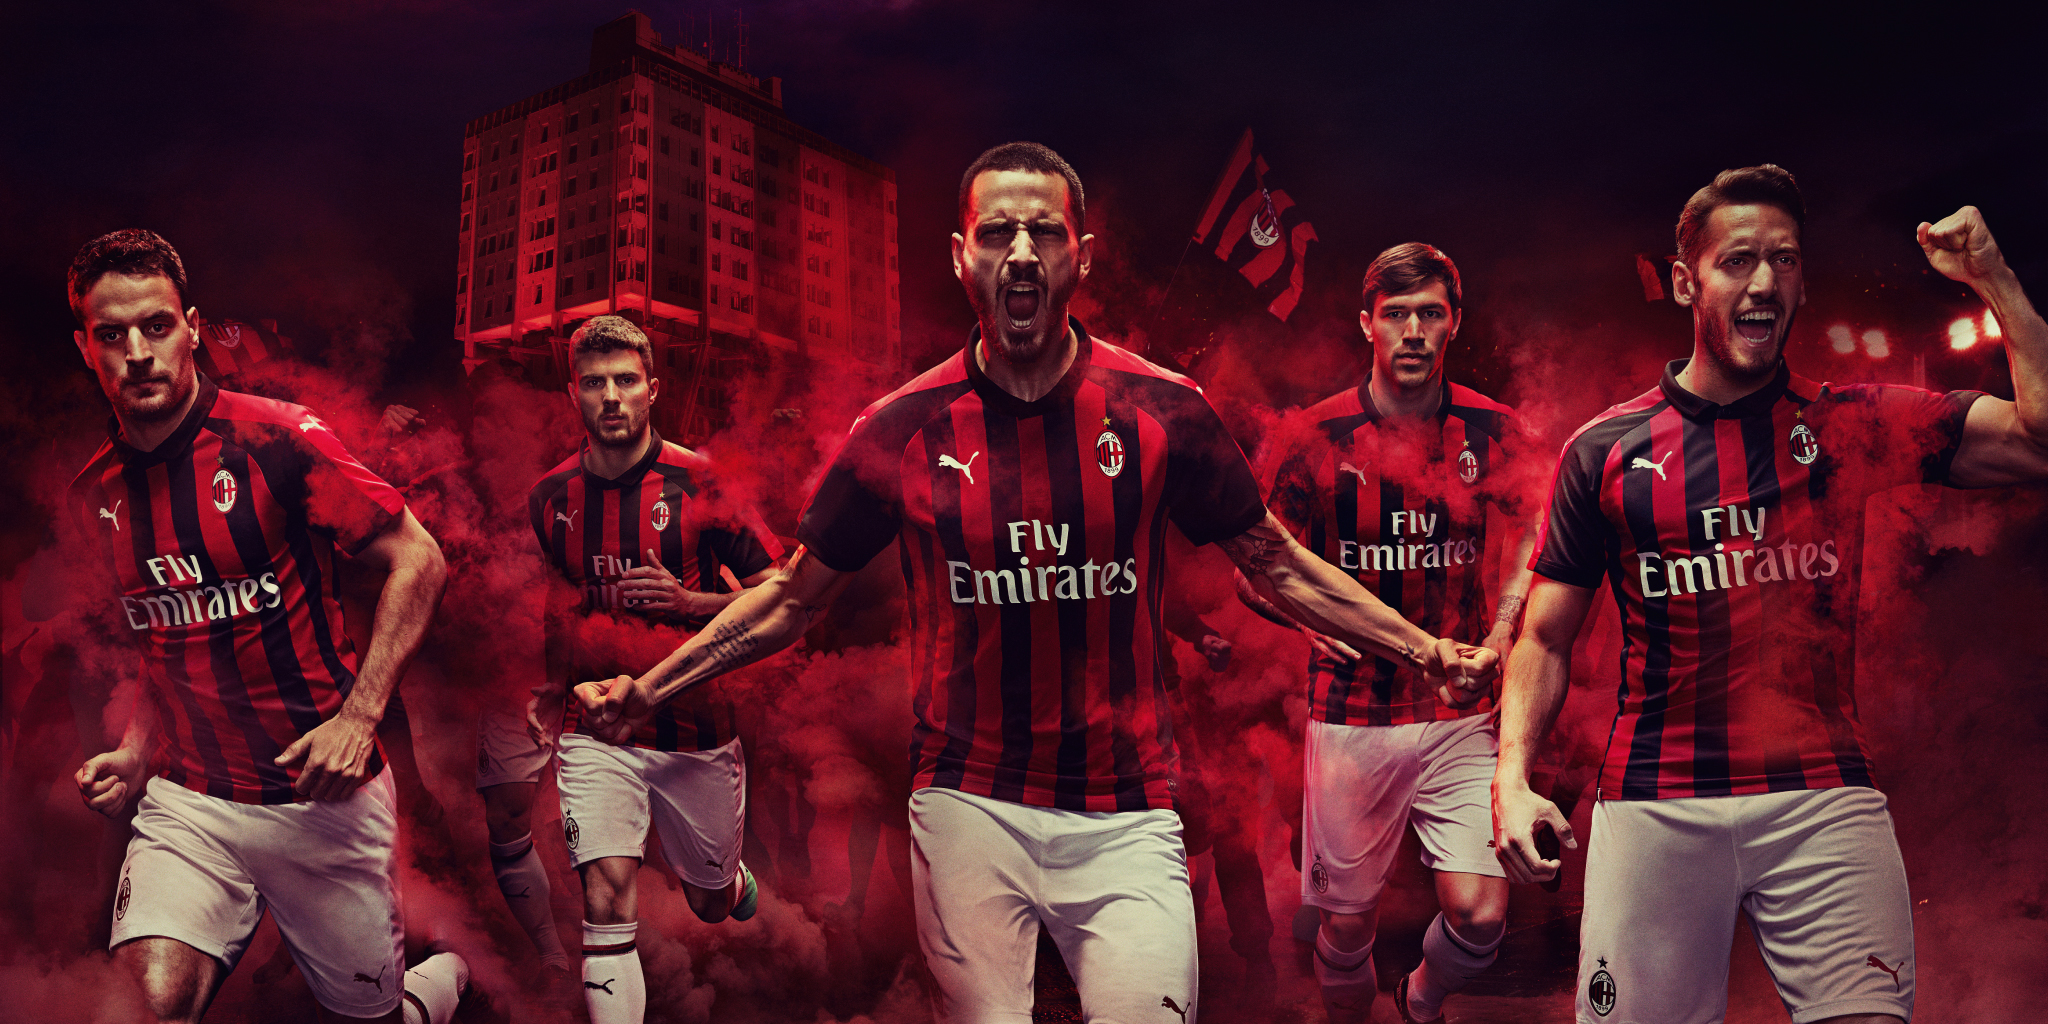 Top 10 most beautiful jerseys in the world - AC Milan News